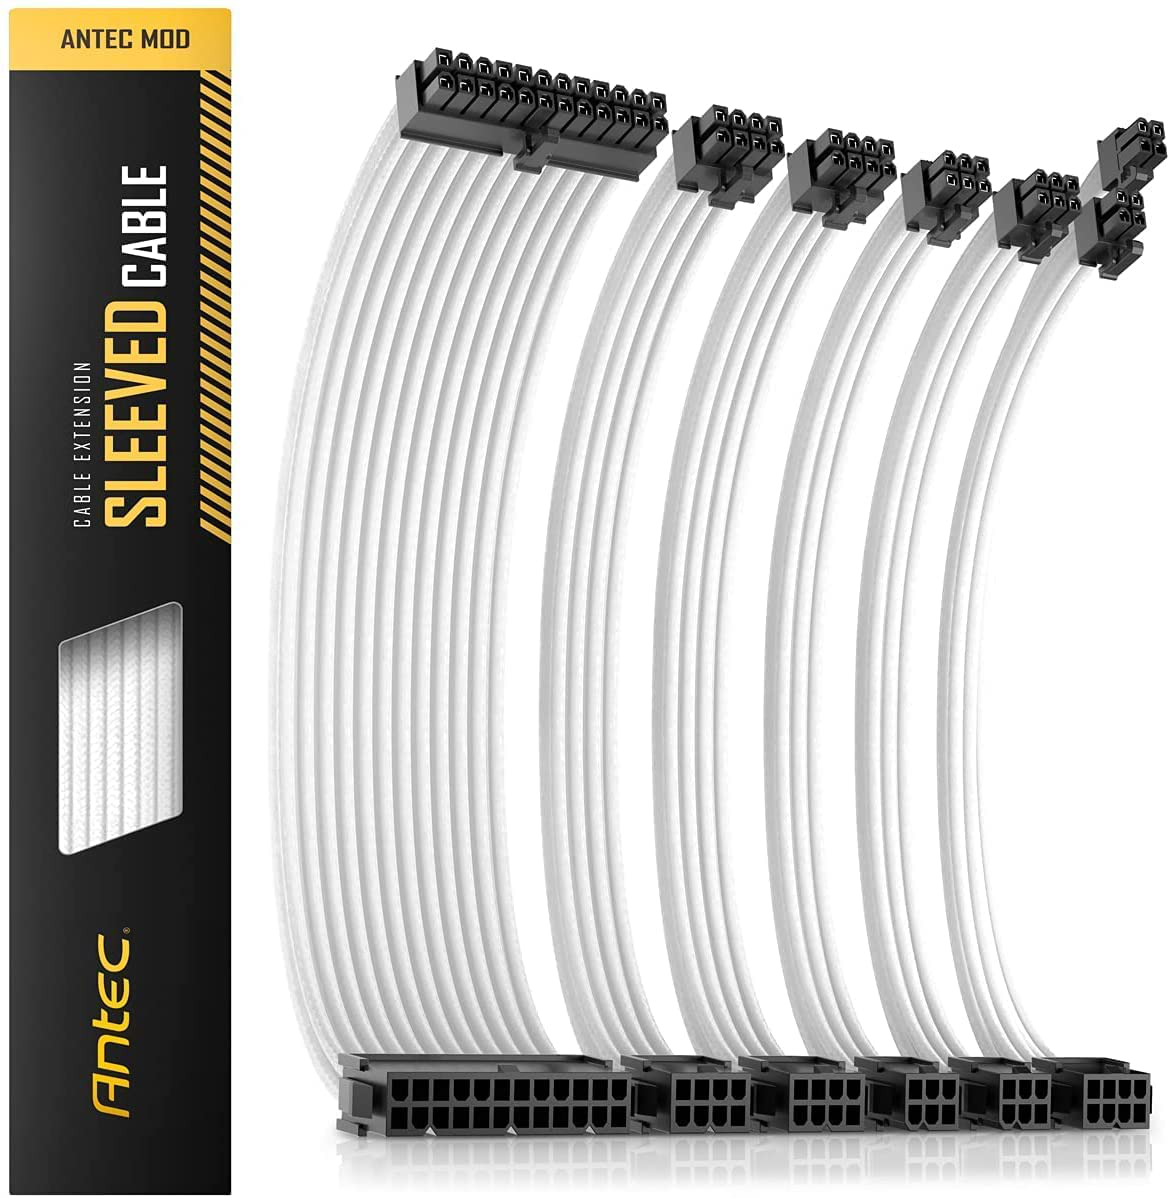 Antec Sleeved Cable - Power Supply Cable Extension Kit with Extra-Sleeved 24 PIN 8PIN 6PIN 4+4 PIN with Combs- Black (11.8Inch/30Cm)